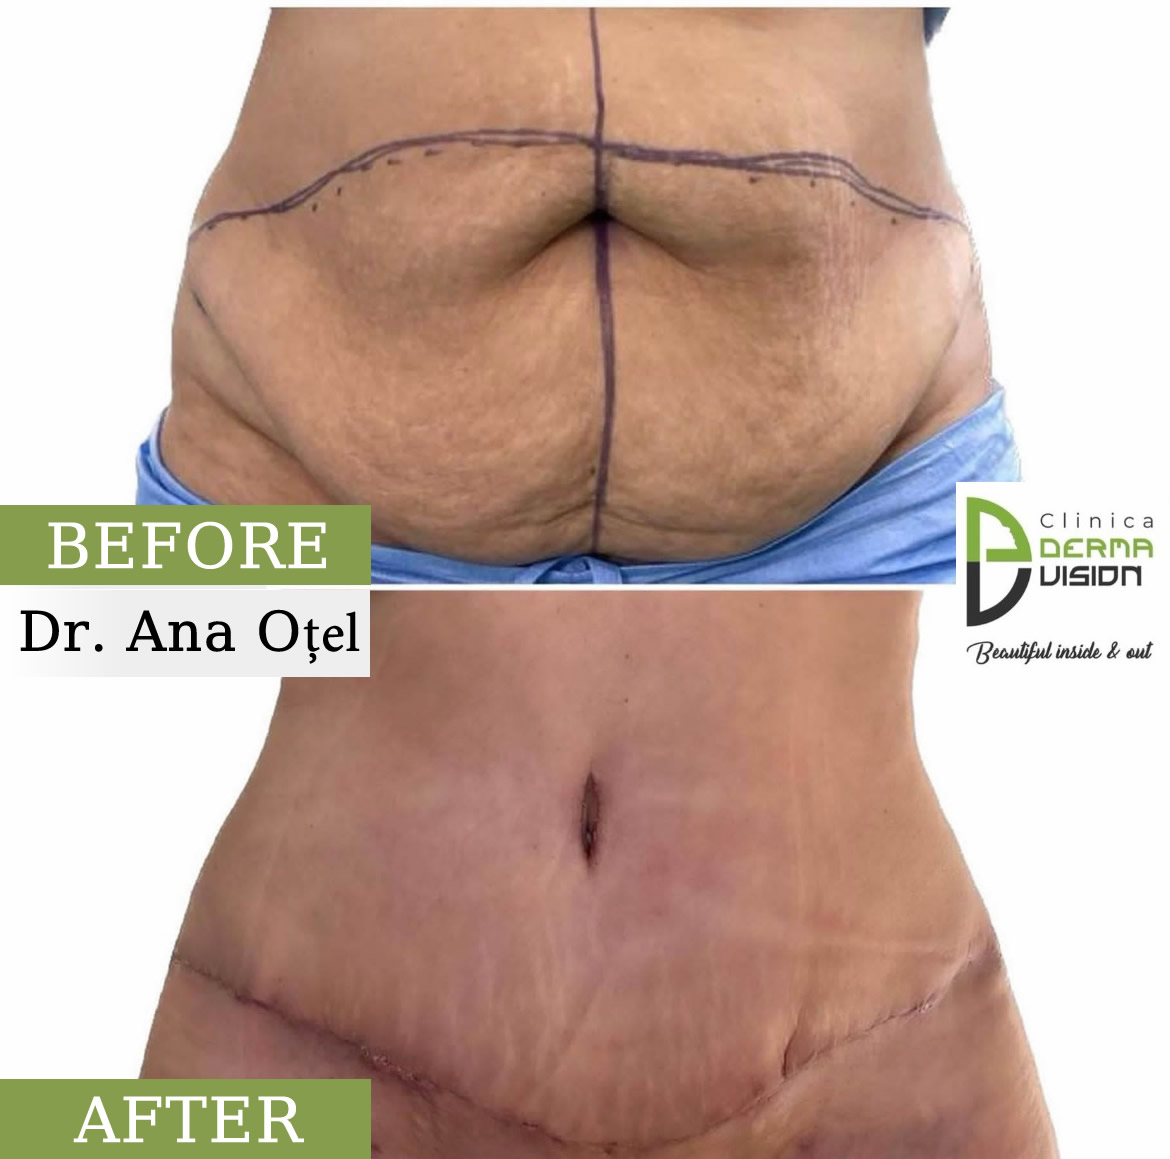 before-after1 Abdominoplastia